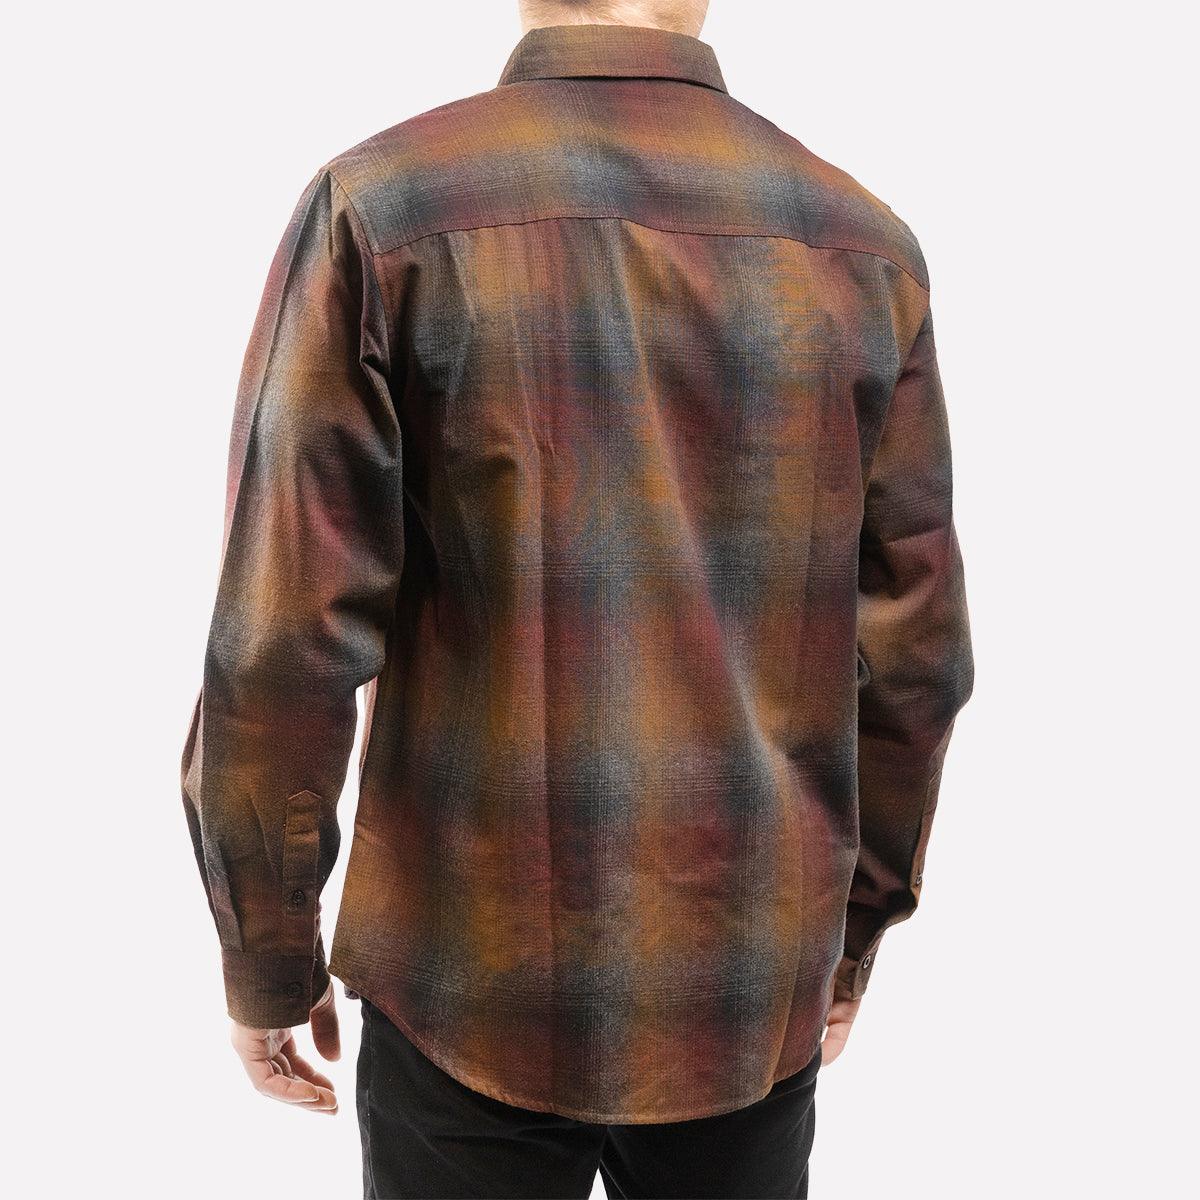 Saturday Night Special Flannel - Dusk - Purpose-Built / Home of the Trades